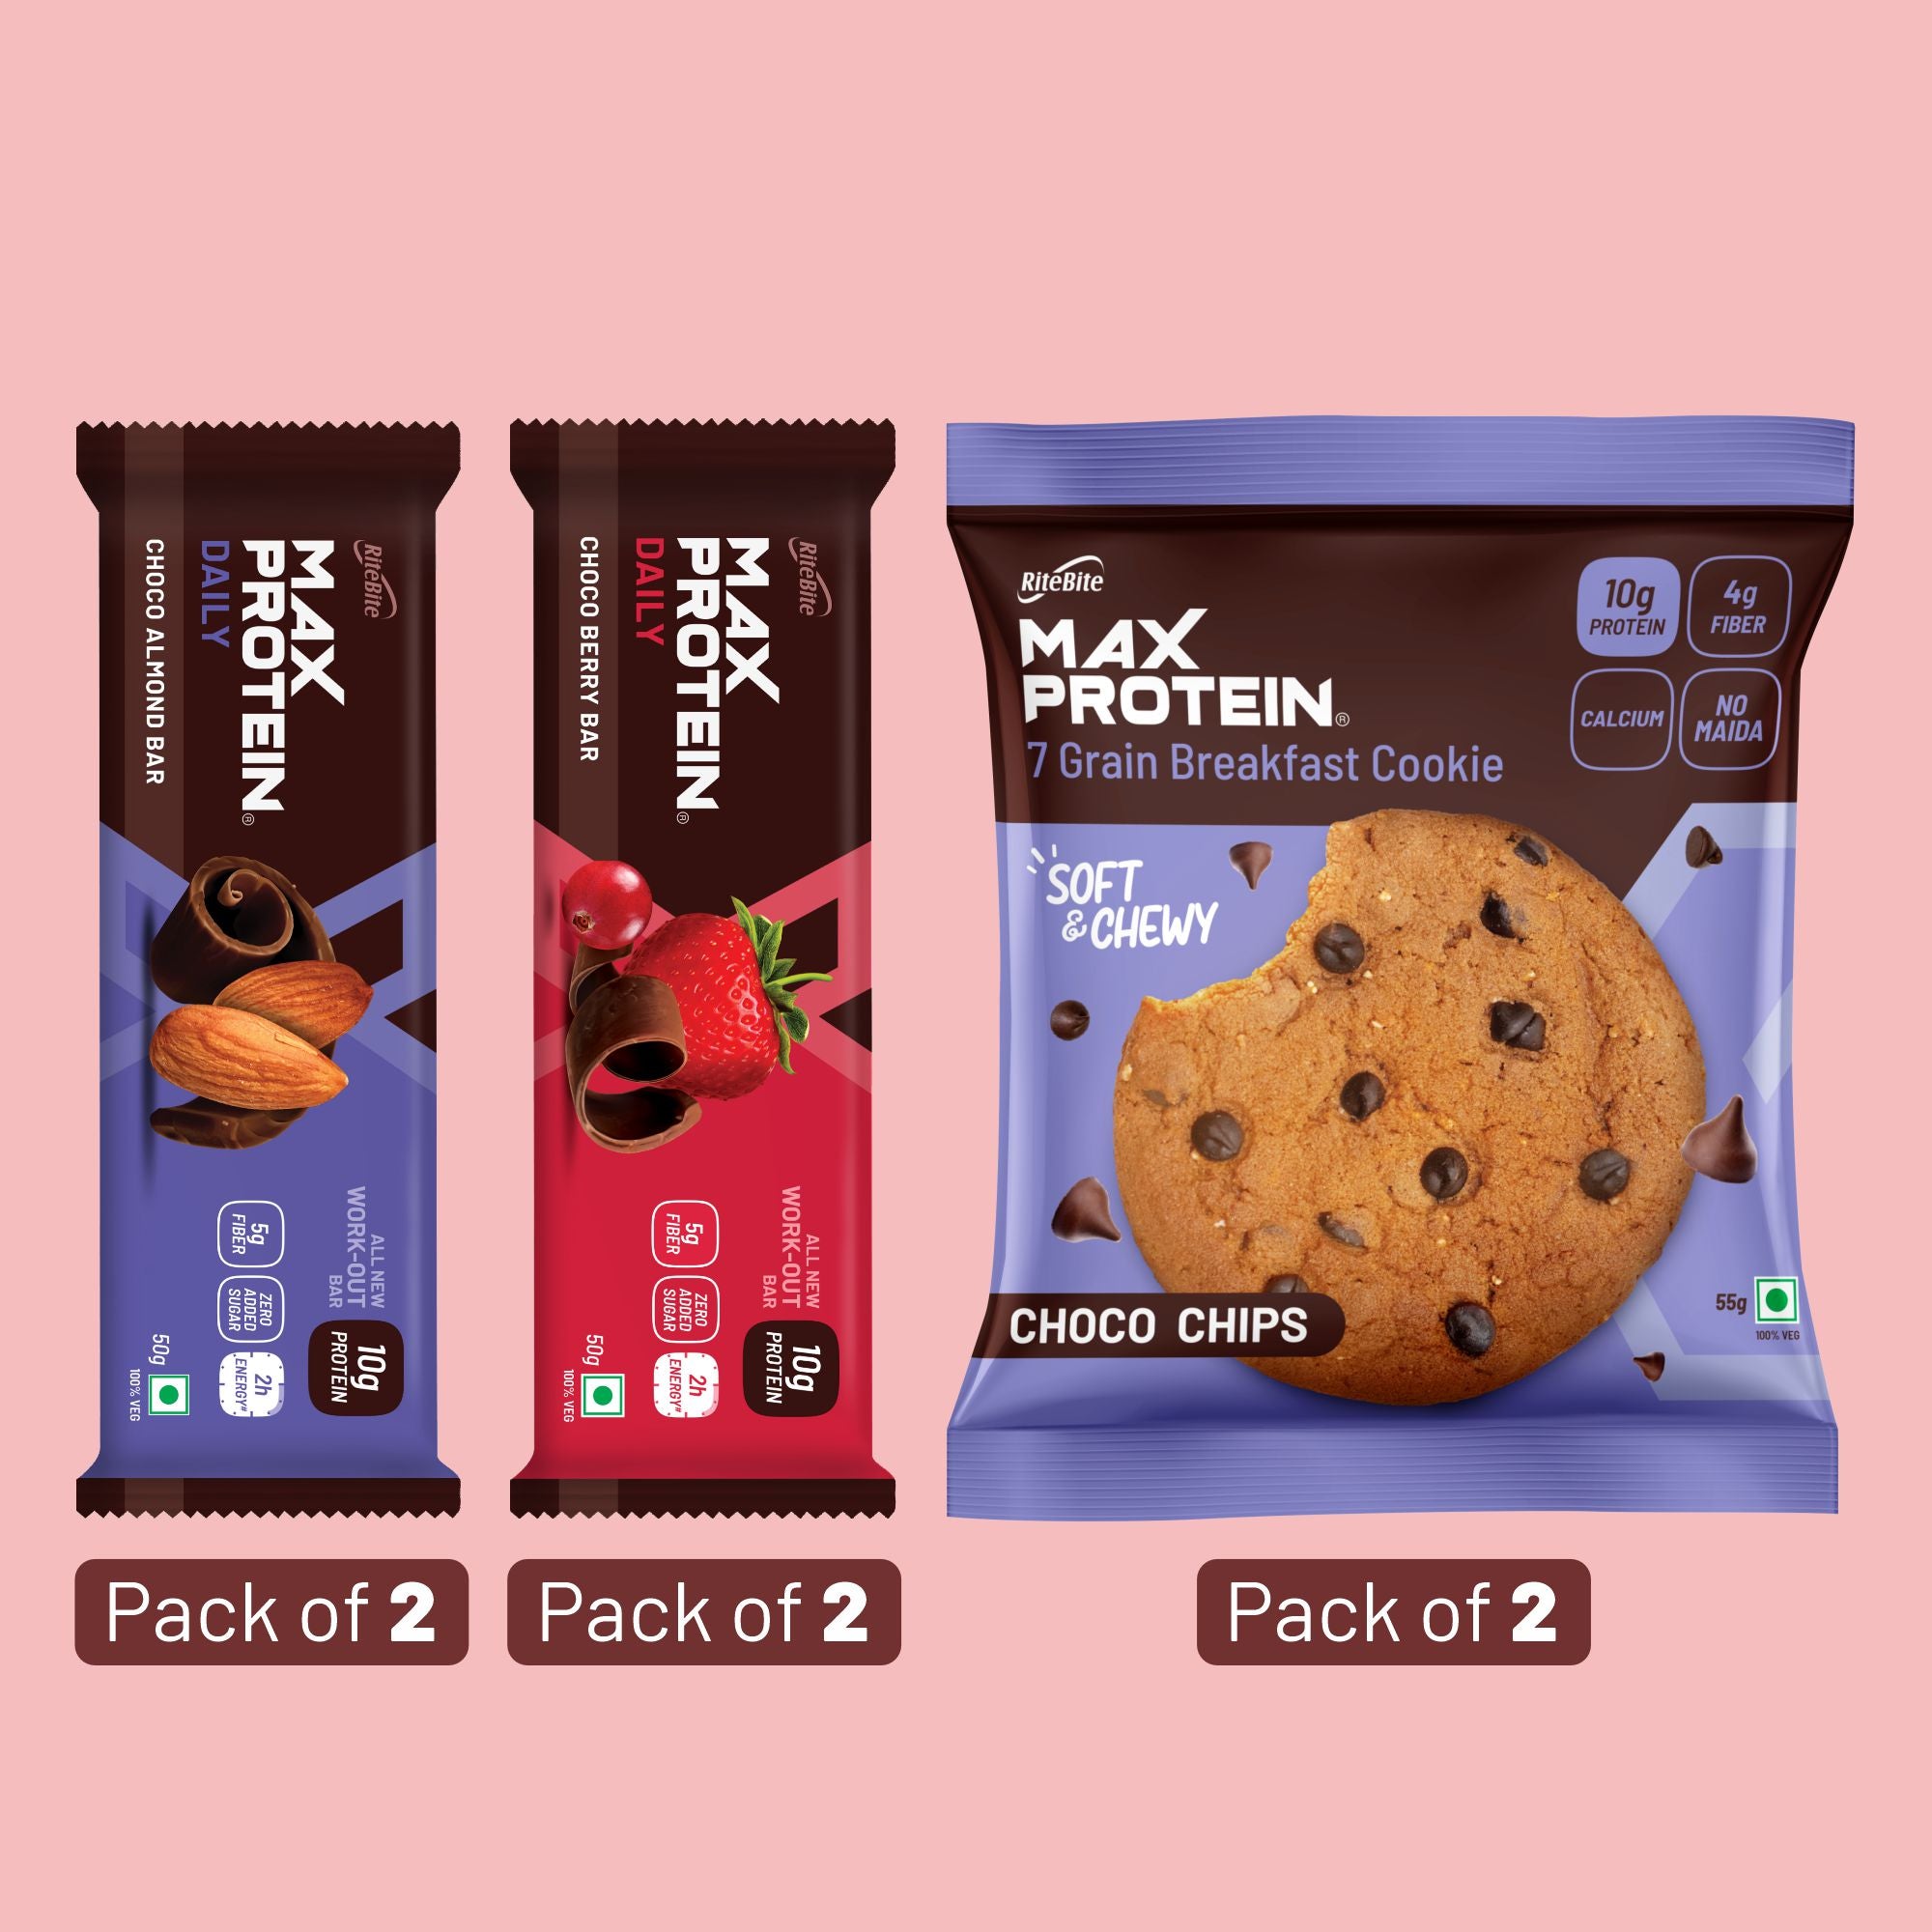 Max Protein Wholesome Gifts